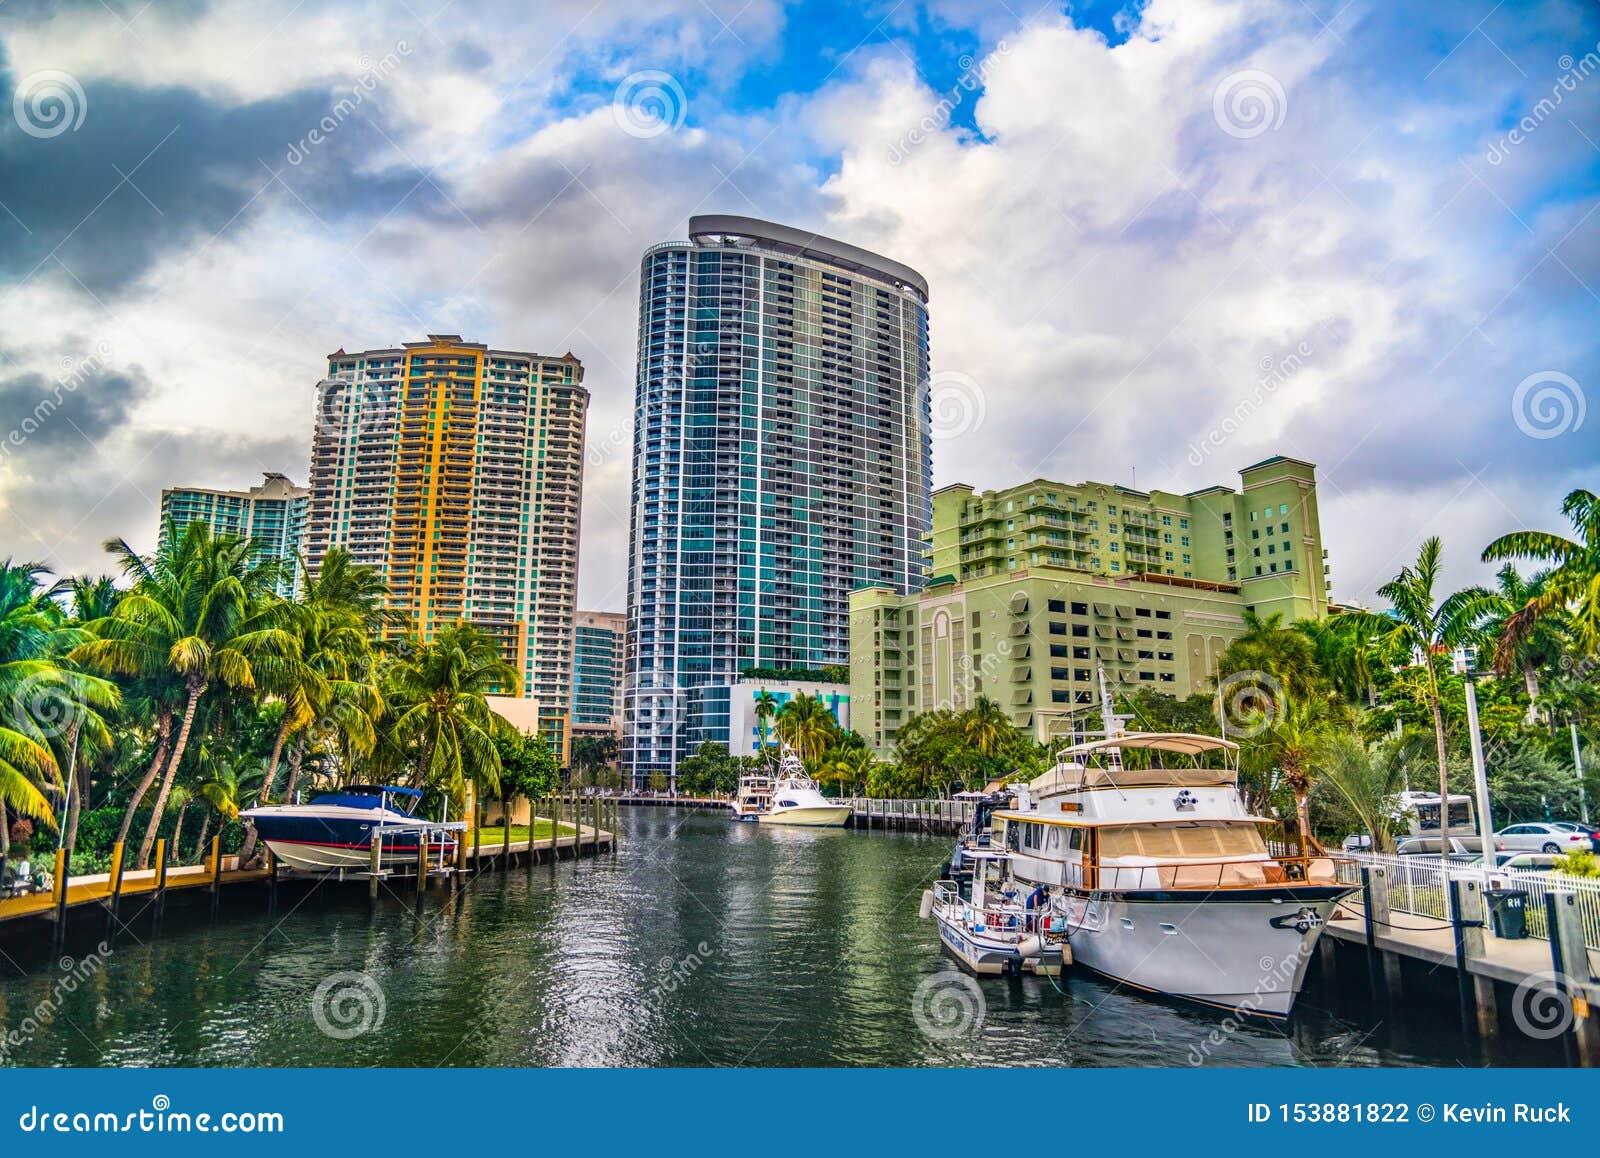 downtown fort lauderdale, florida, usa skyline from waterway